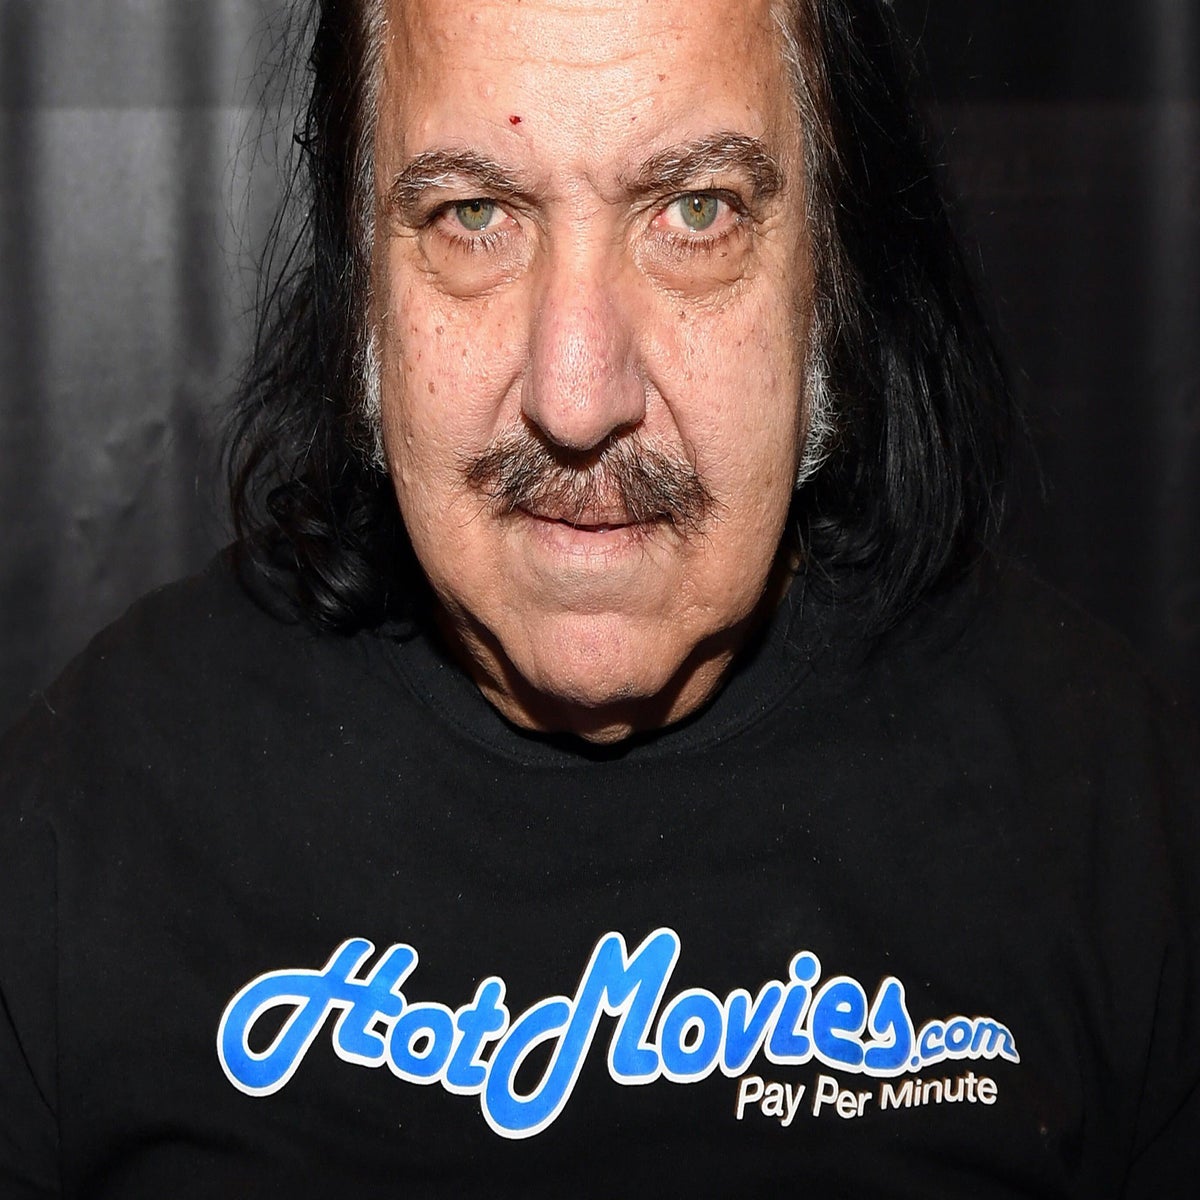 Xxxx Brazz Rape - Ron Jeremy is 'monster' who struggled to separate porn from reality,  victims claim | The Independent